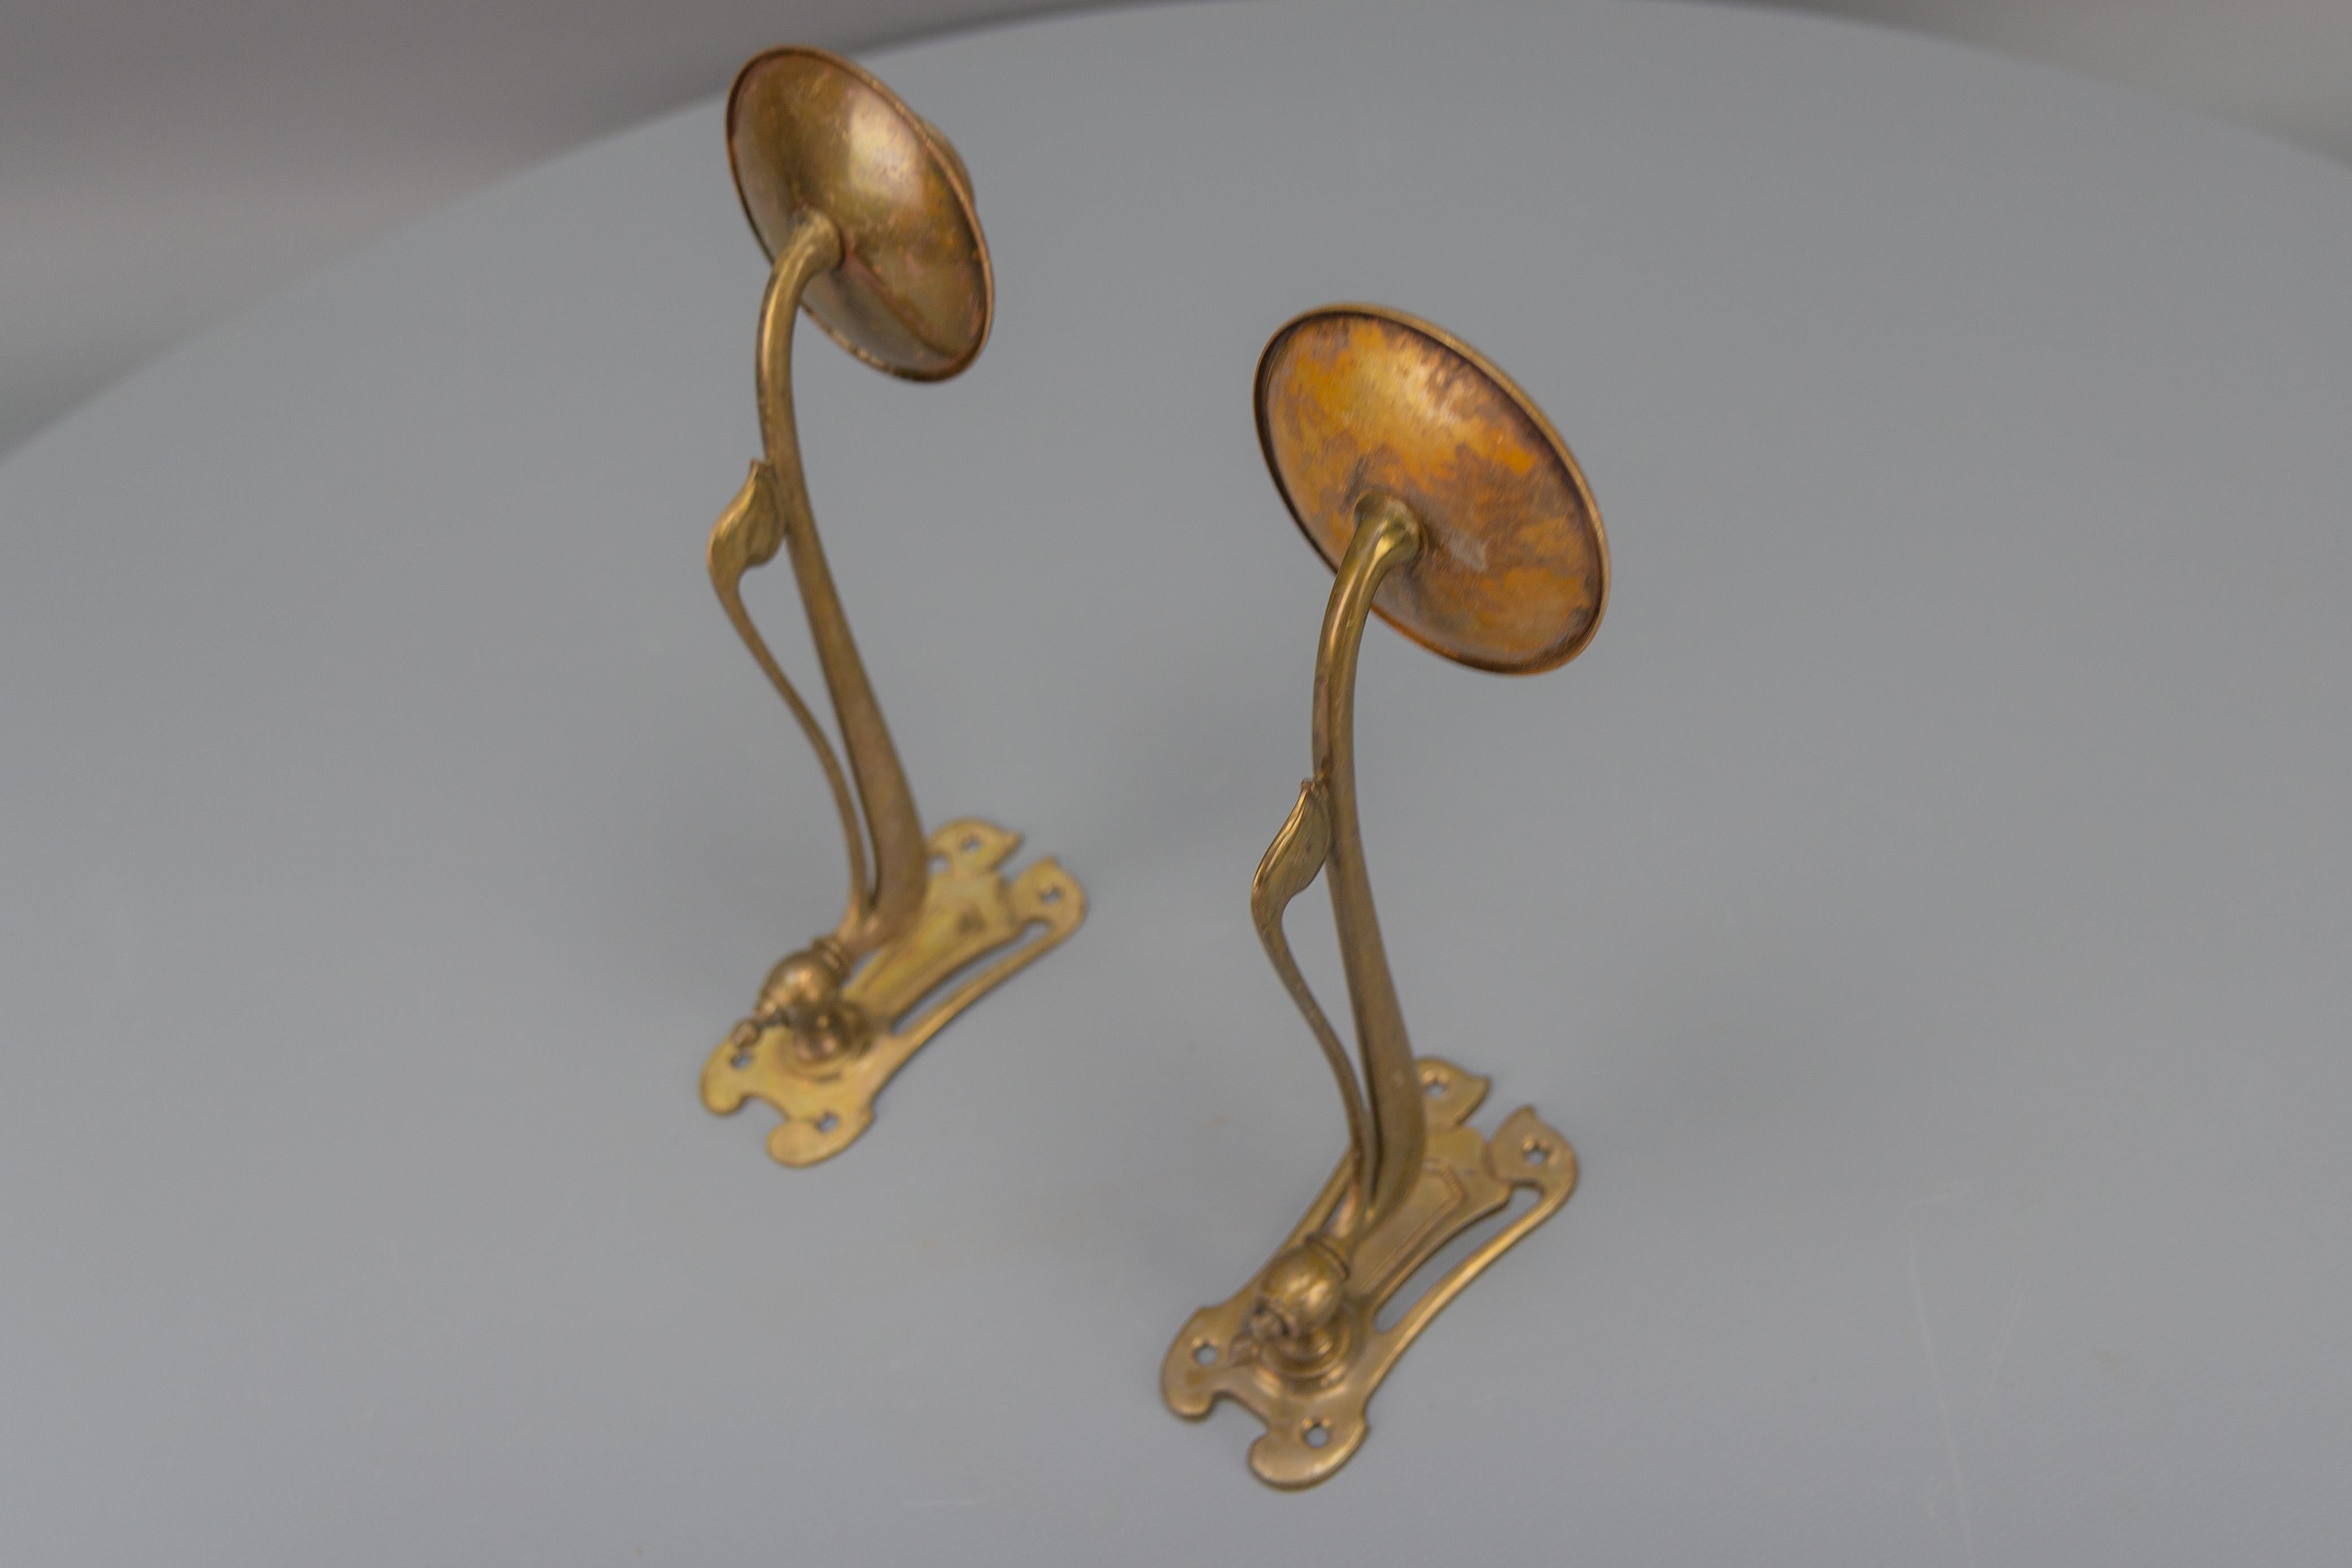 Pair of French Art Nouveau Brass Piano Wall Sconces Swivel Candle Holders, 1920 For Sale 6